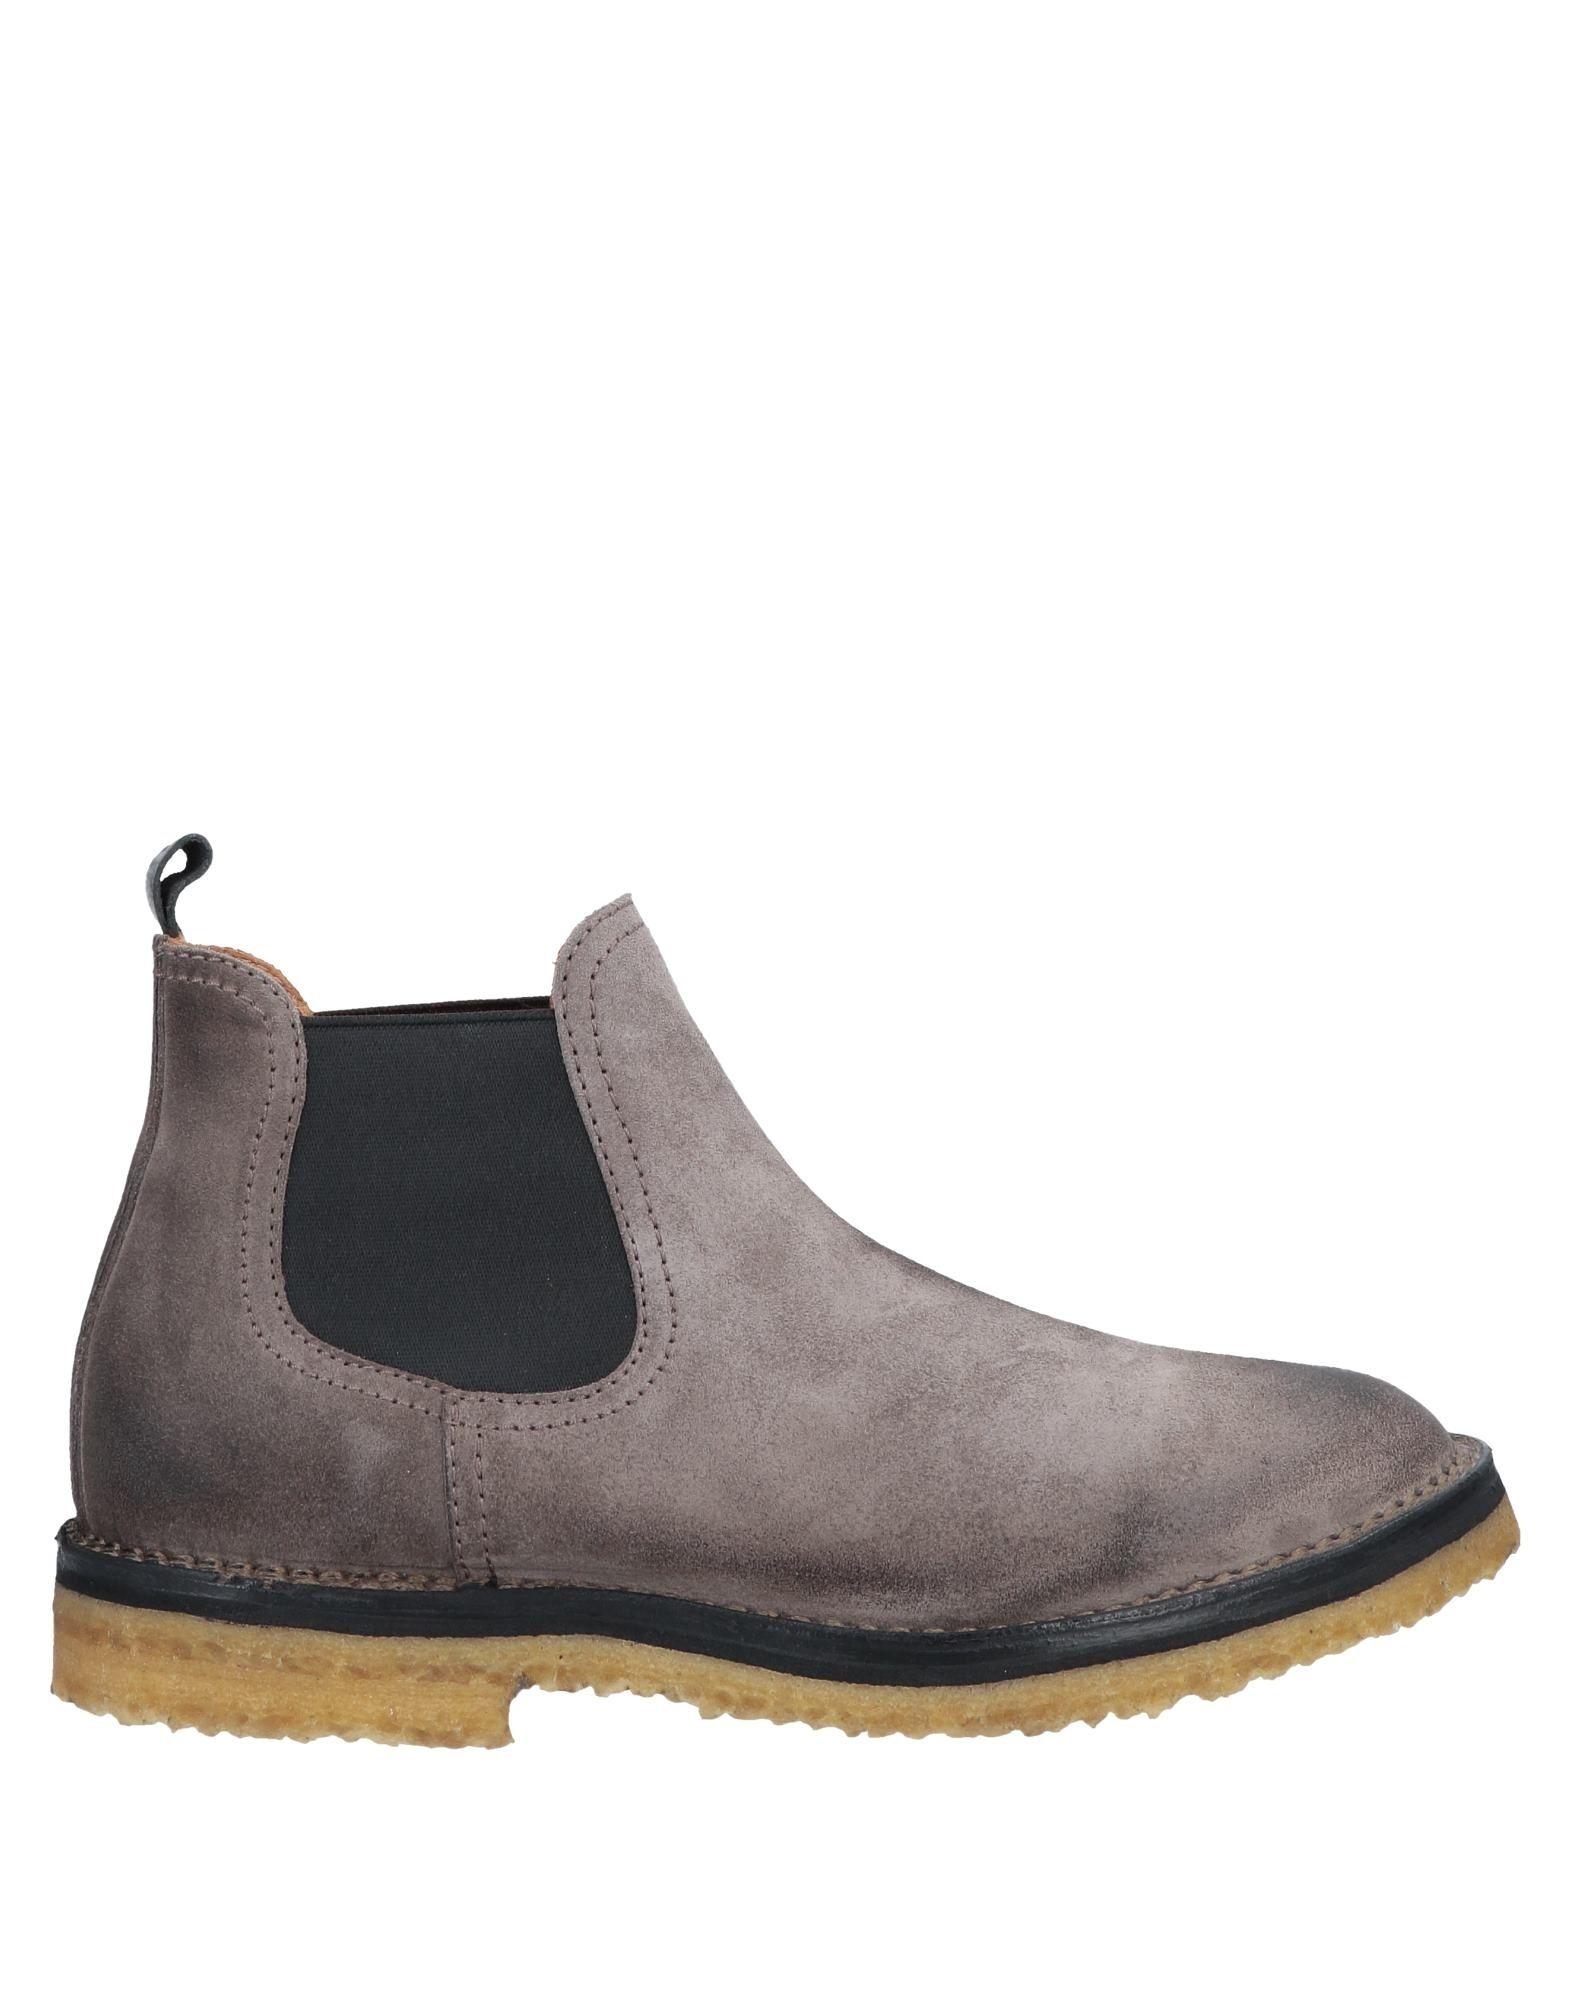 Buttero Leather Ankle Boots in Grey (Gray) for Men - Lyst